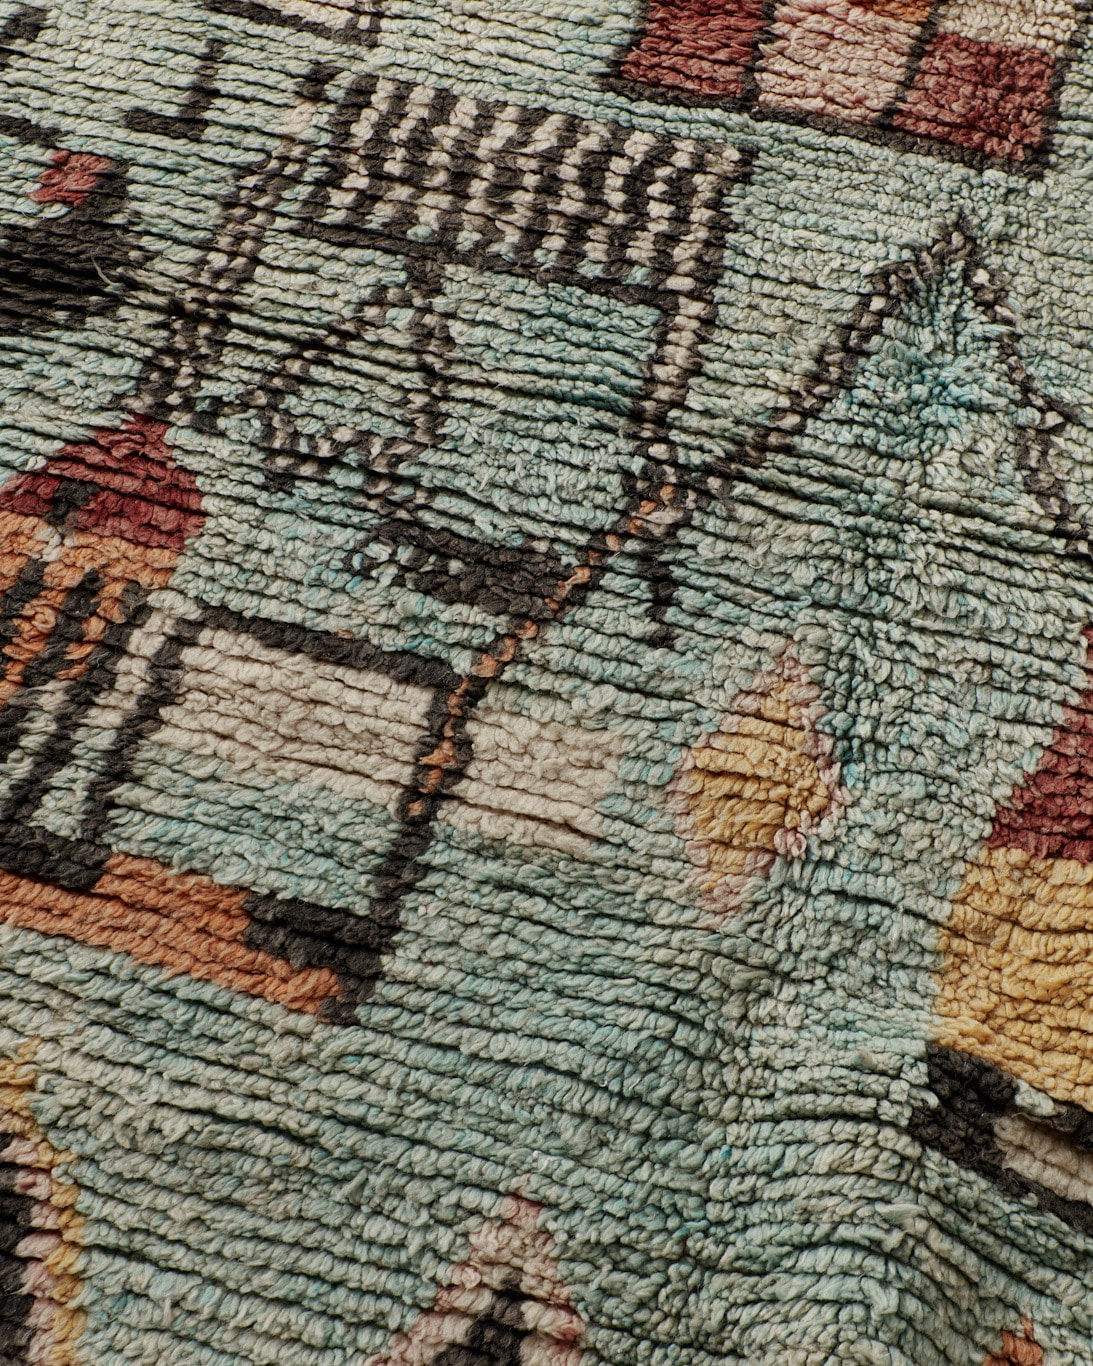 Boujaad rug with colour transition, detail